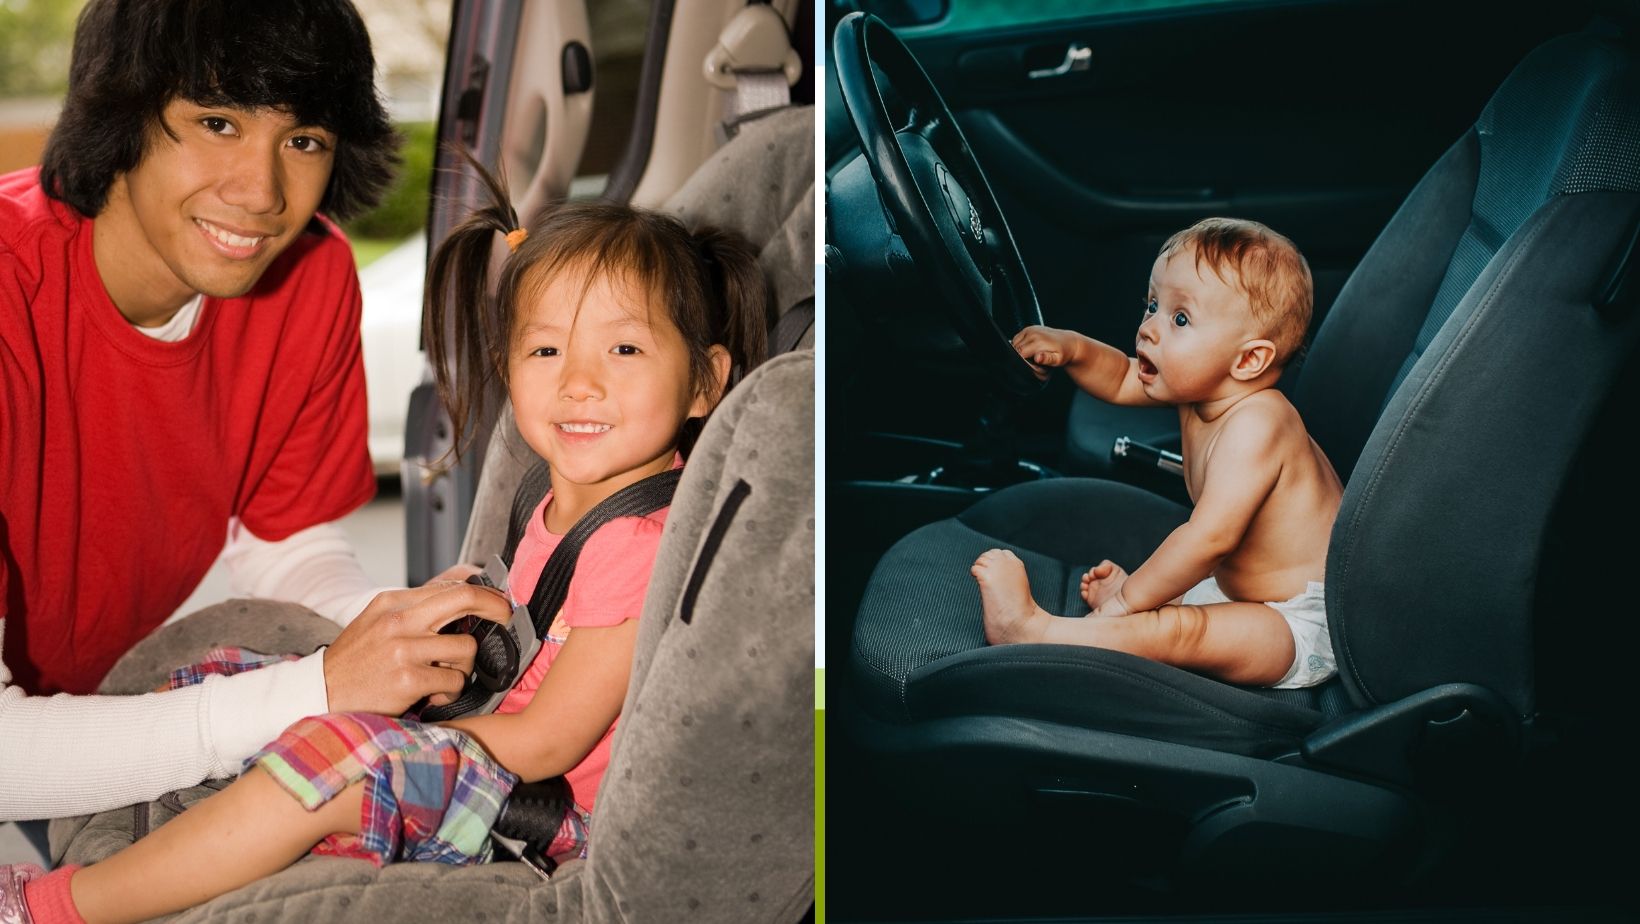 Two babies seated in different car seats.